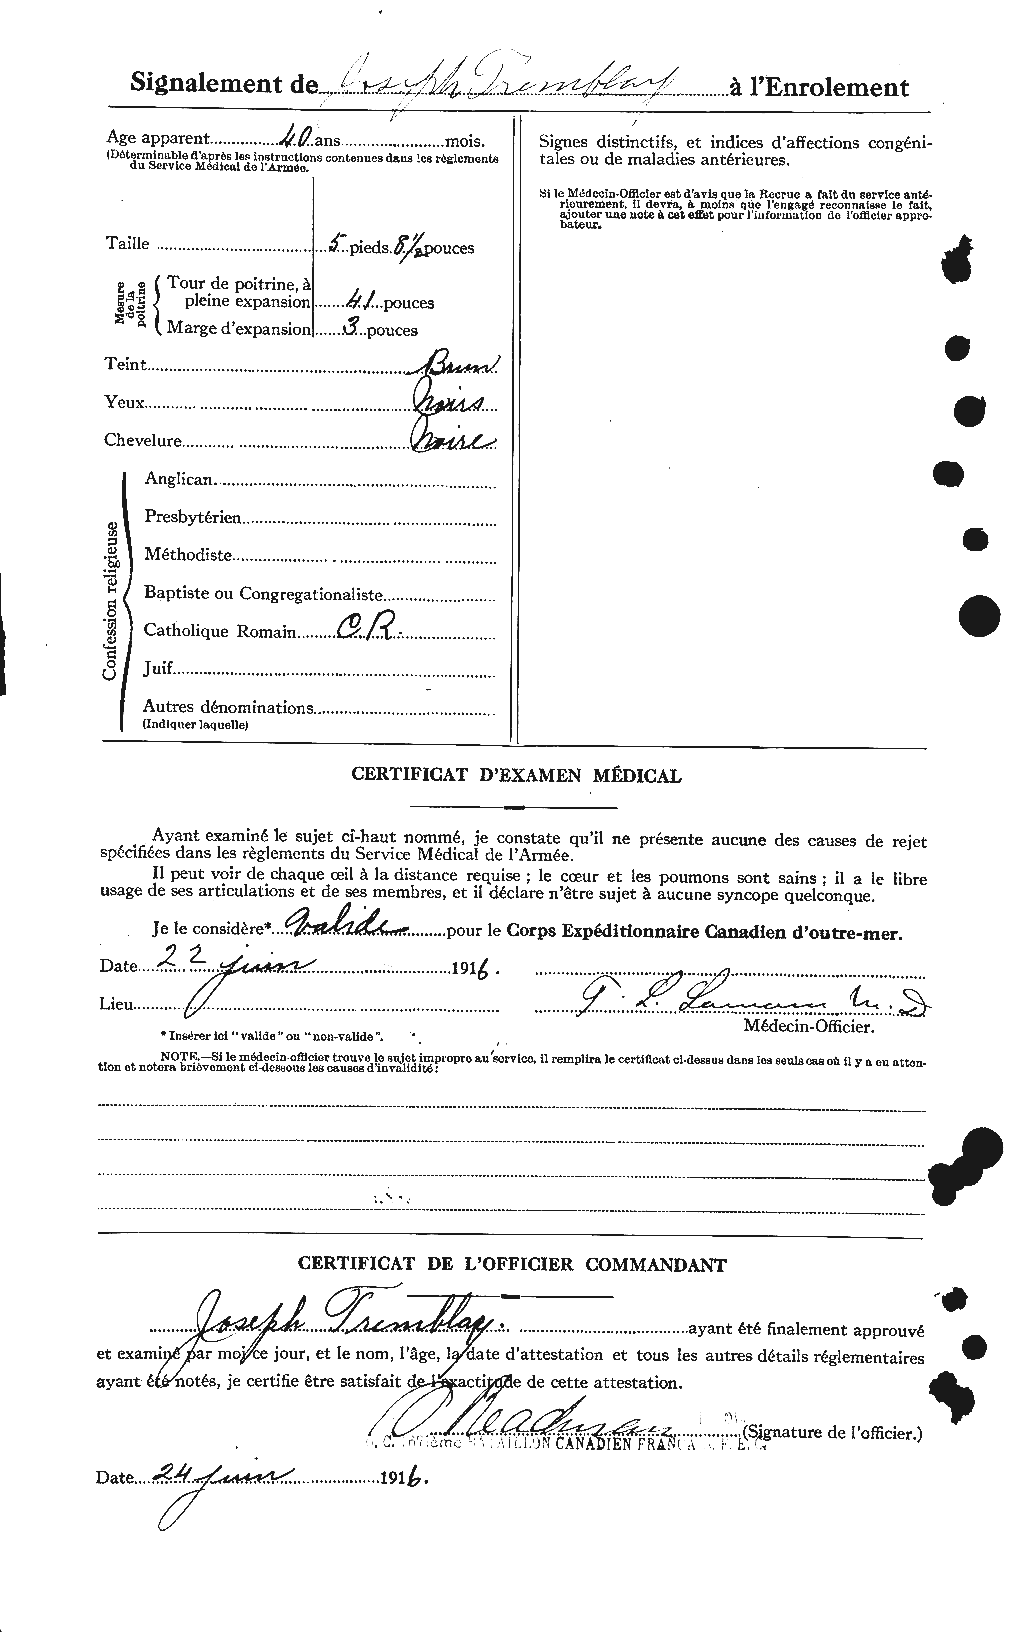 Personnel Records of the First World War - CEF 639130b